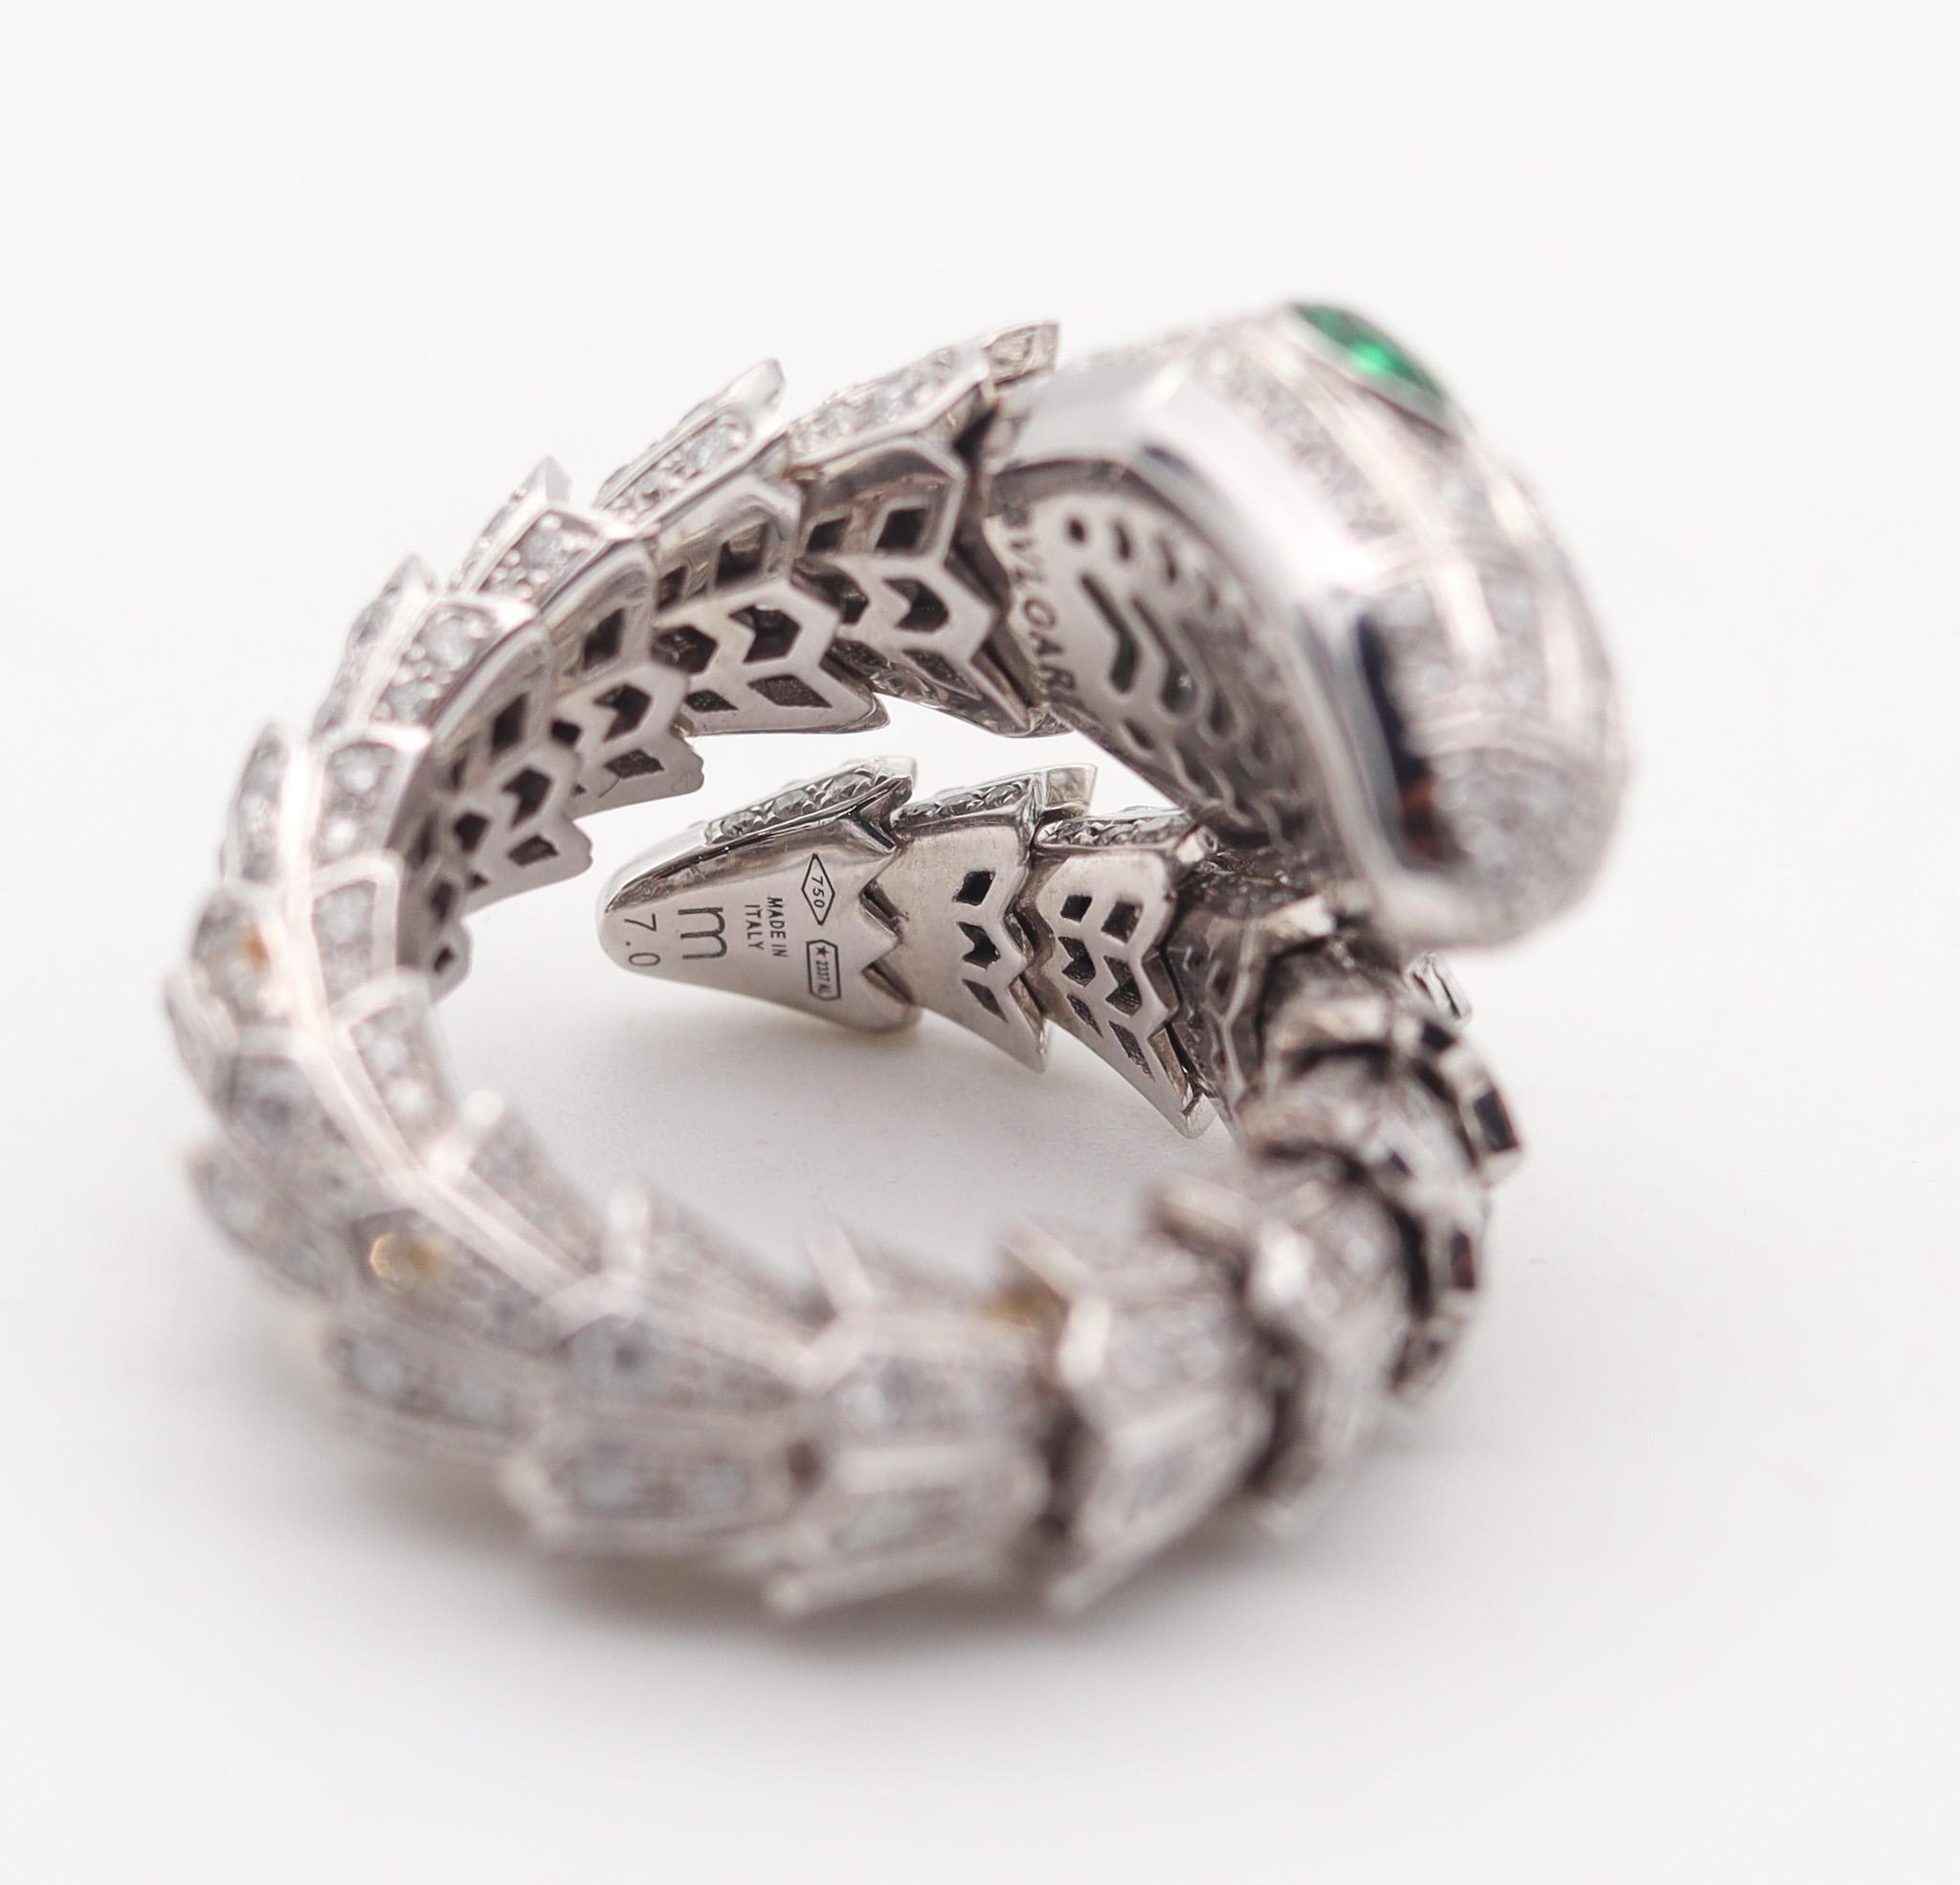 Brilliant Cut Bvlgari Roma Serpenti Ring In 18Kt Gold With 7.36 Ctw In Diamonds And Emerald For Sale